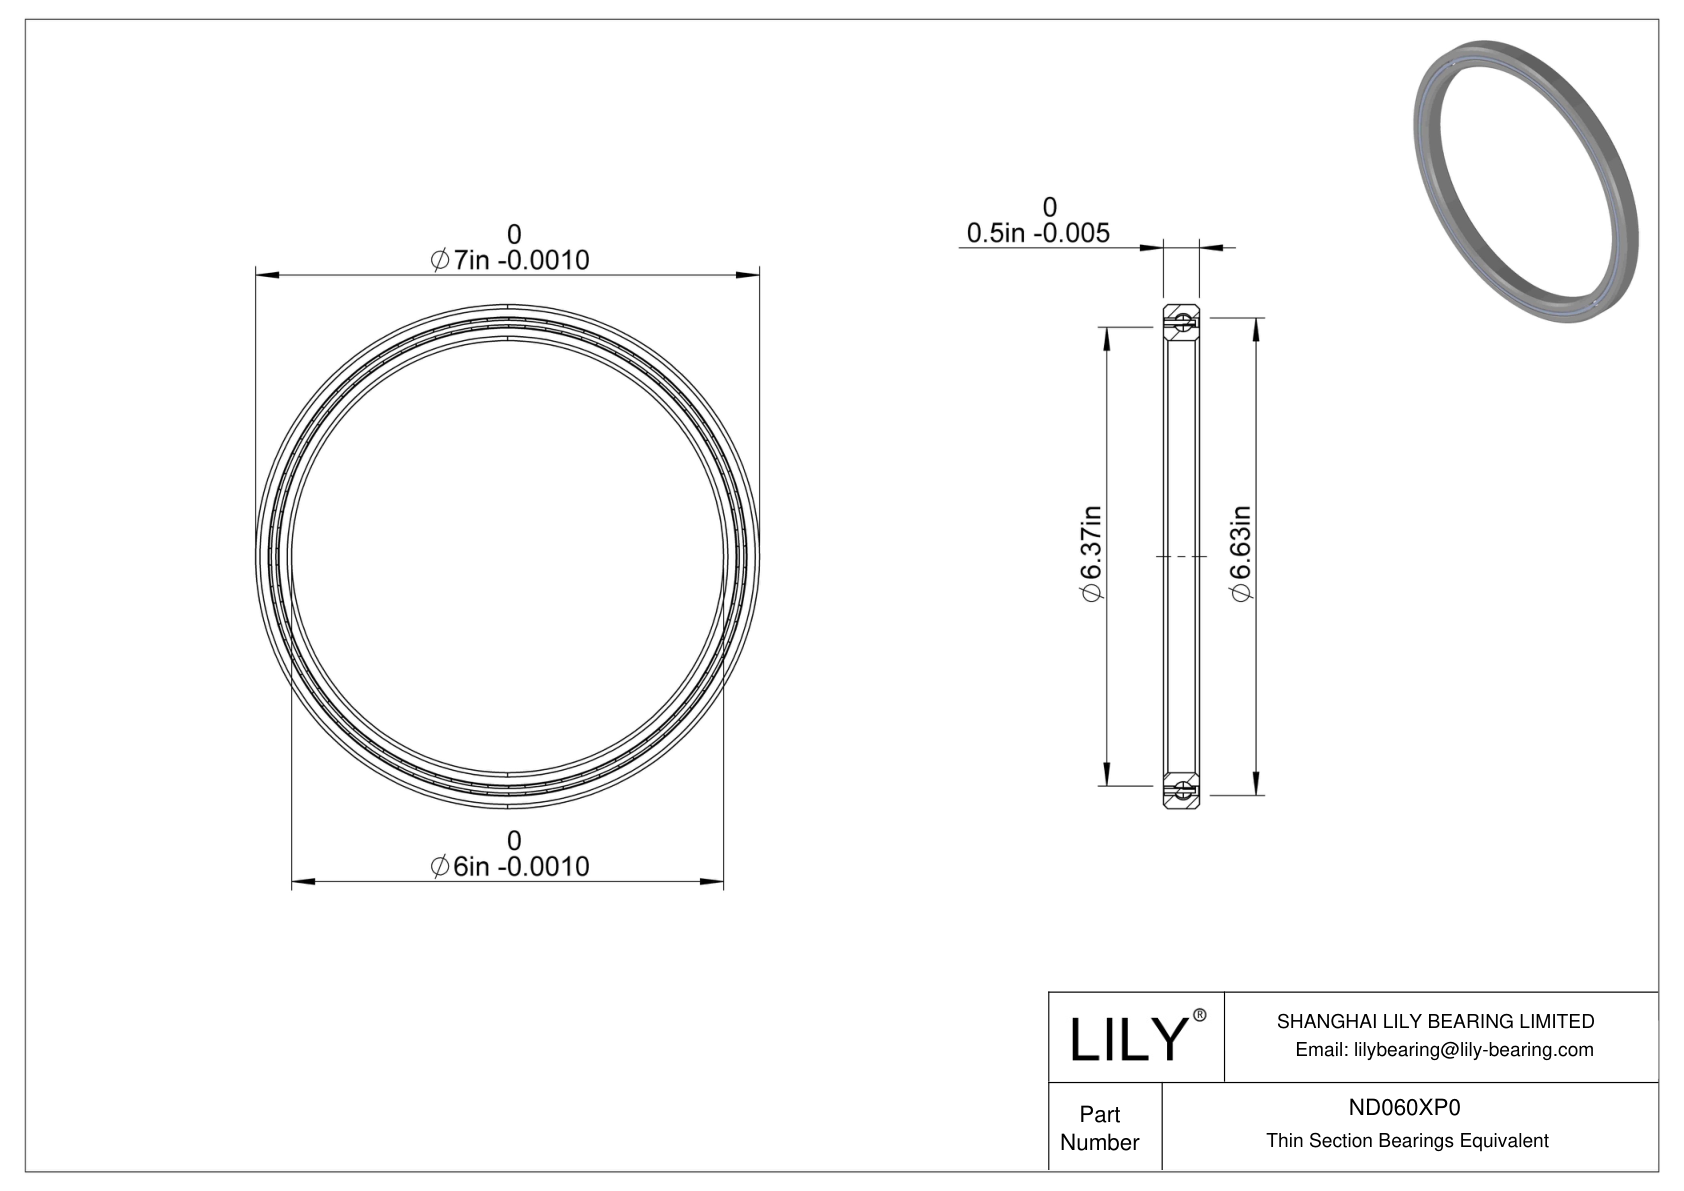 ND060XP0 Constant Section (CS) Bearings cad drawing